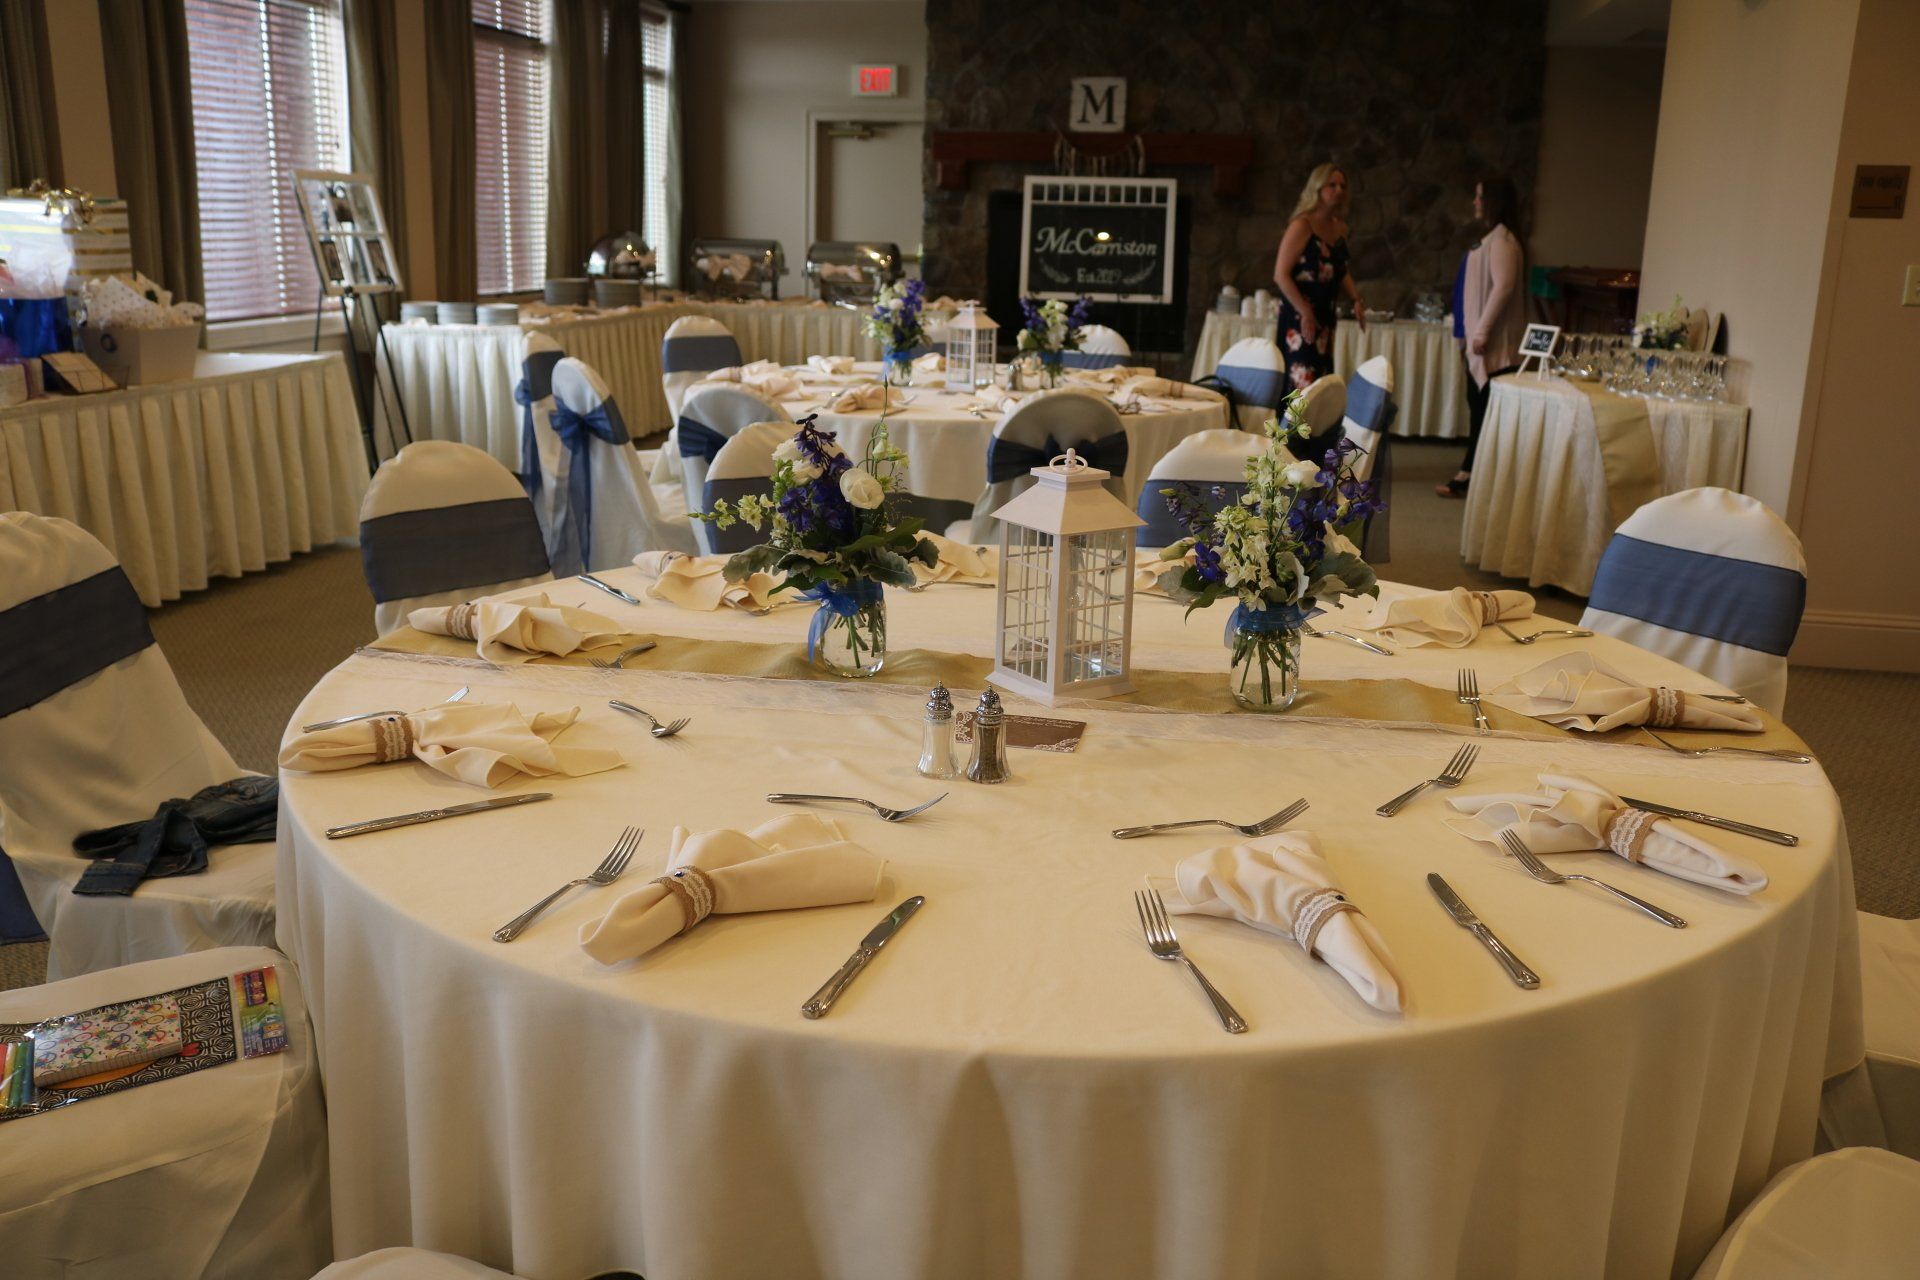 Banquet tables set with large candle centerpieces, glassware and silverware with white table cloths.